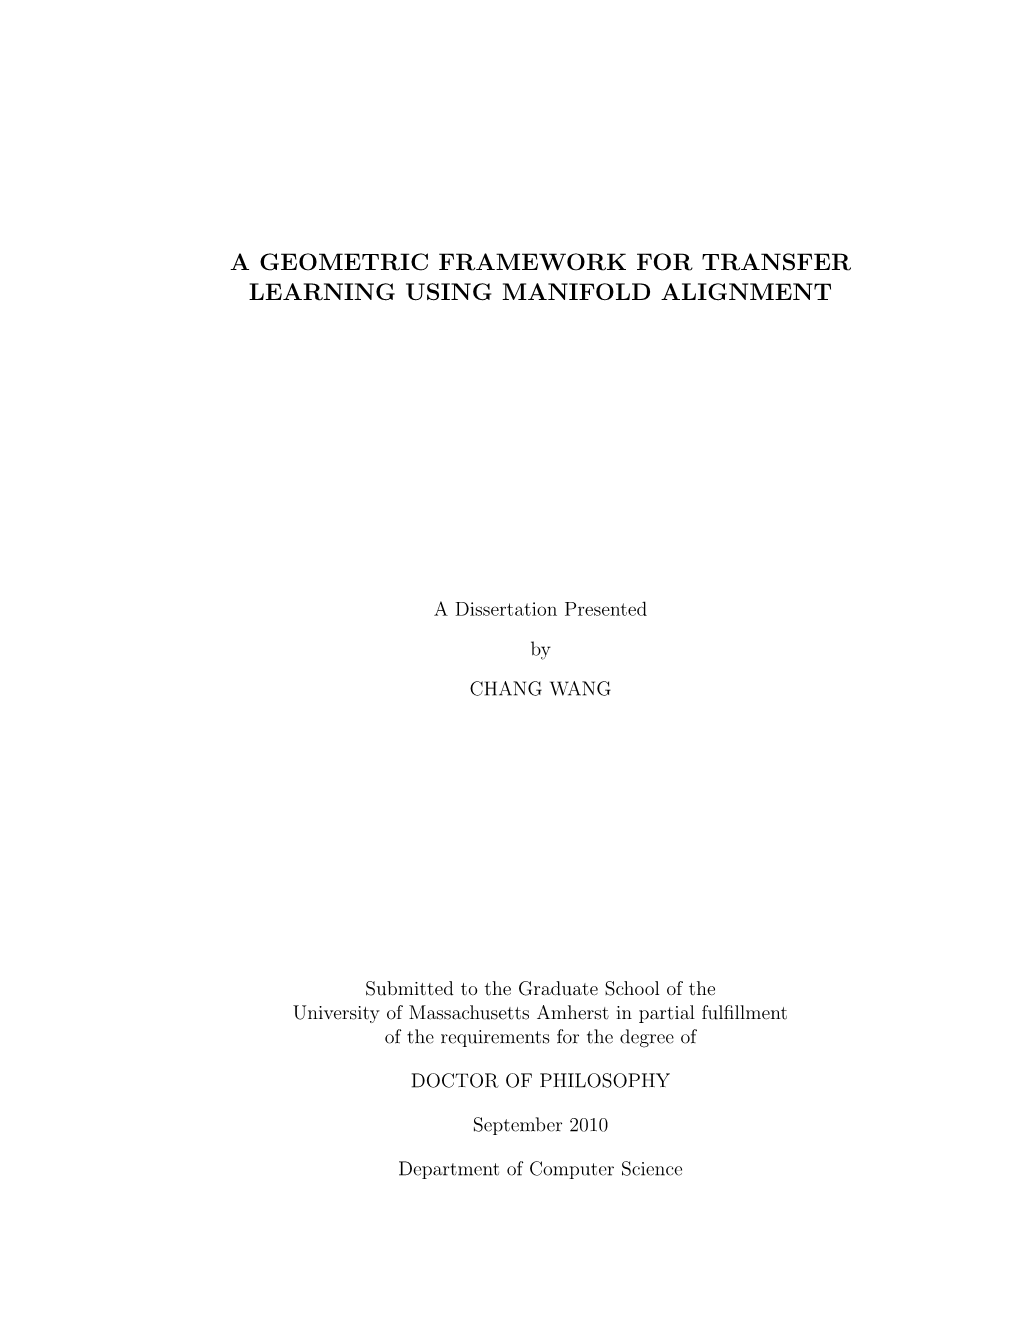 A Geometric Framework for Transfer Learning Using Manifold Alignment